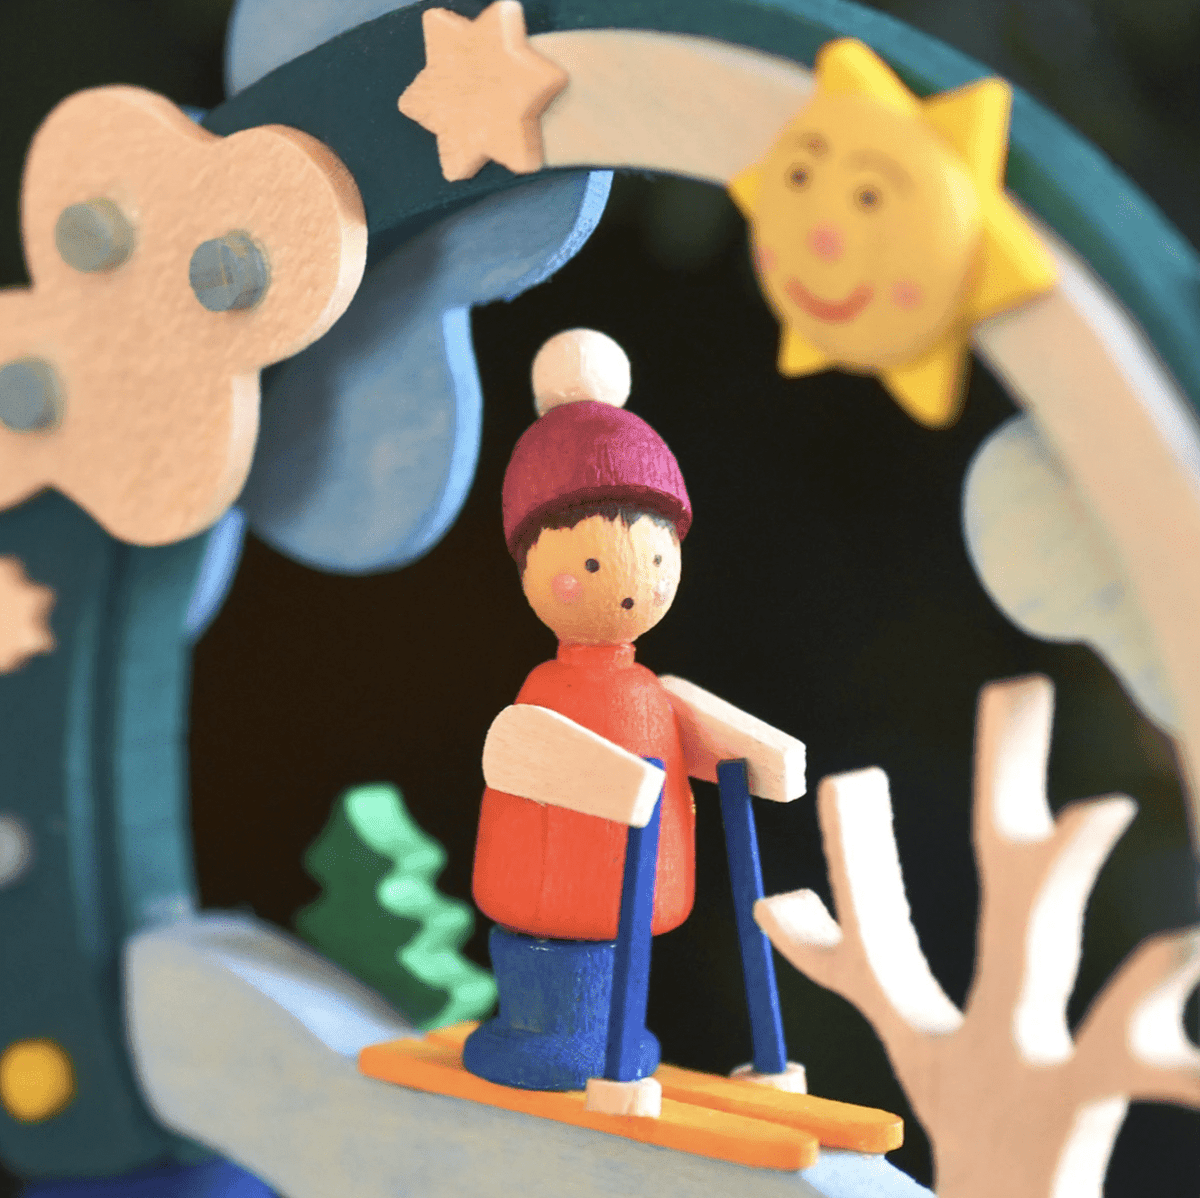 The Curated Parcel - Graupner // Christmas Tree Ornament Diorama 